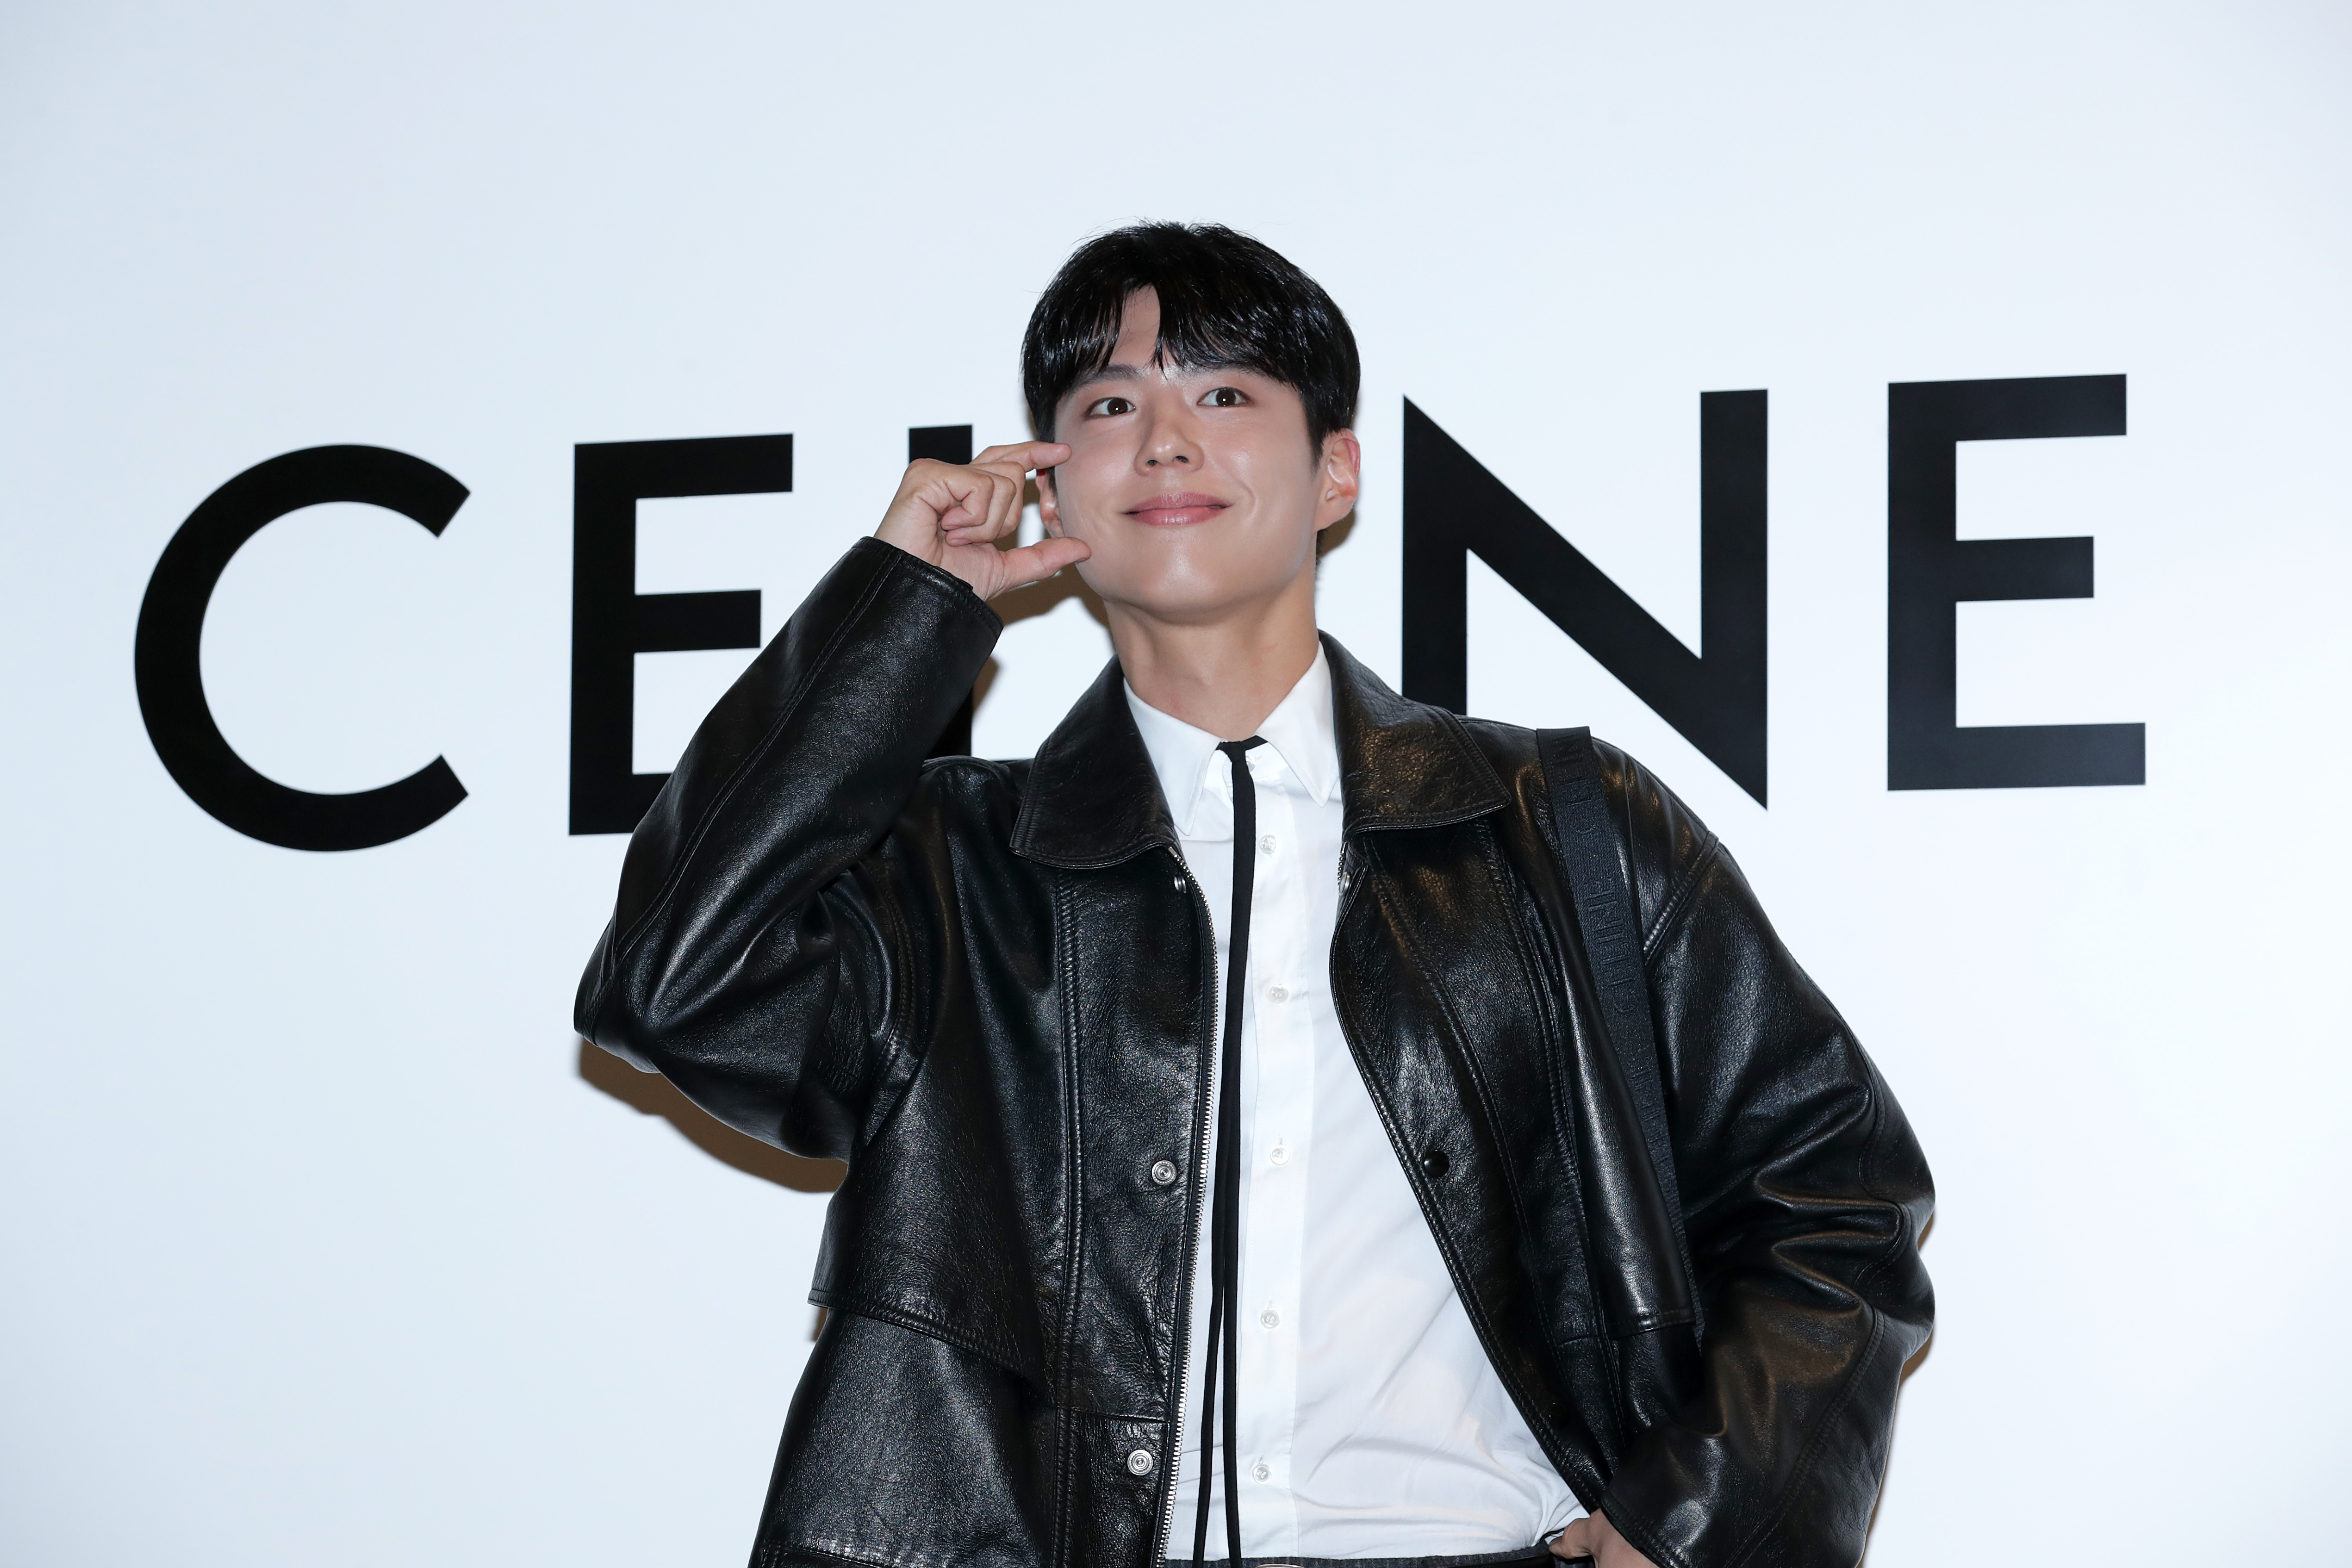 Park Bo-Gum is seen at the 'CELINE' pop-up store opening at The Hyundai on March 30, 2023, in Seoul, South Korea. | Source: Getty Images